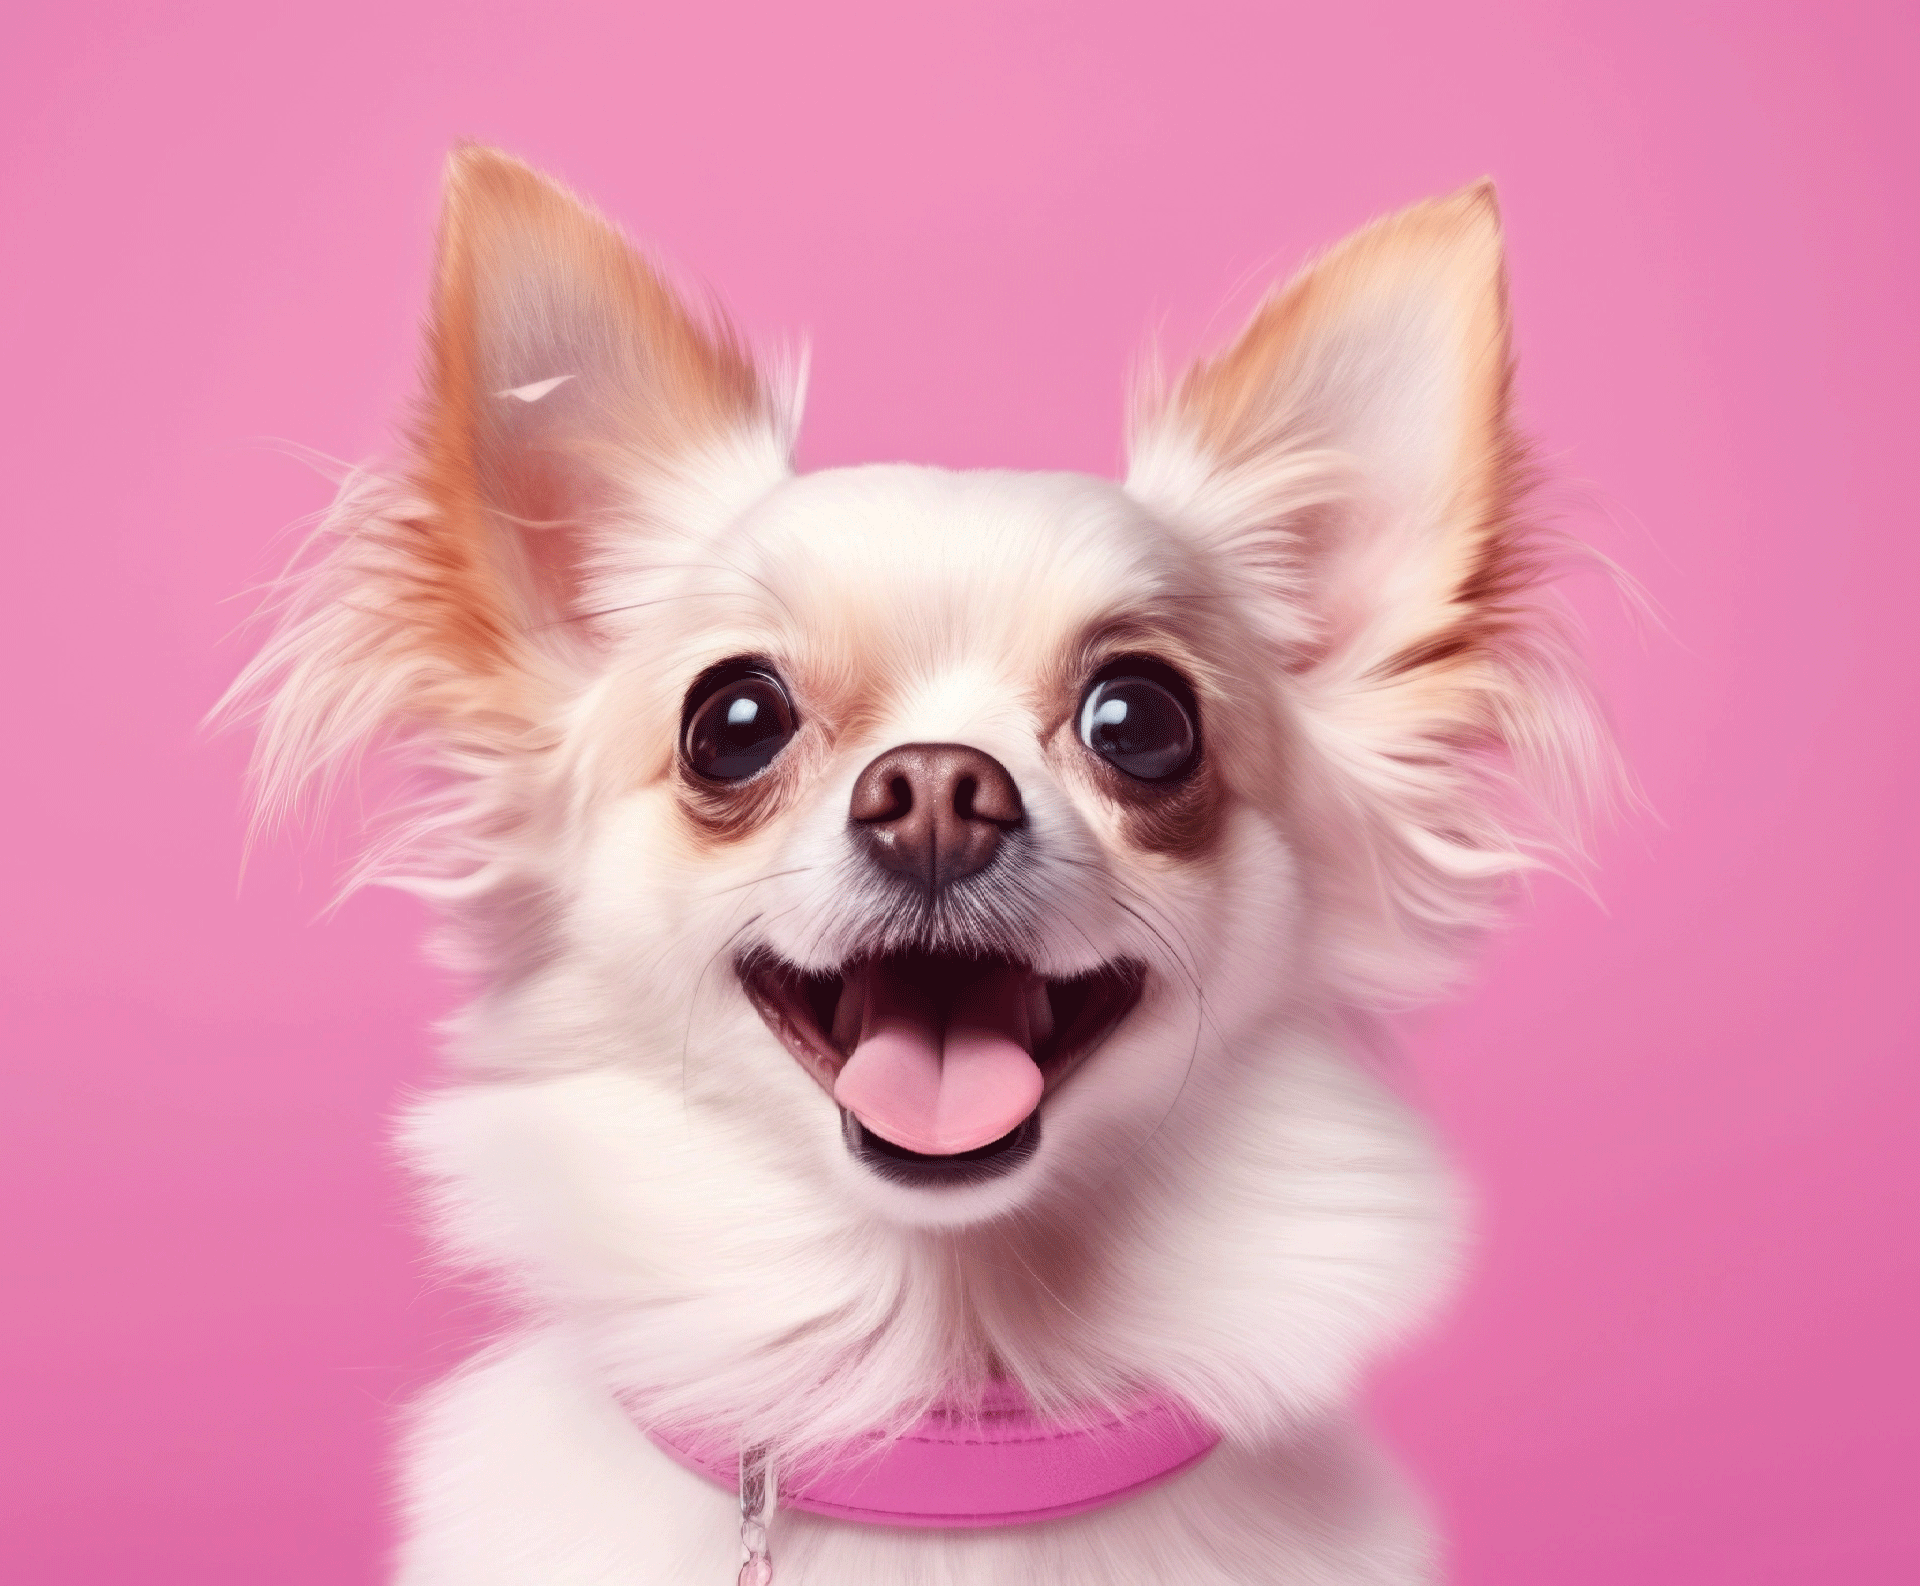 A white chihuahua dog with a pink collar on a pink background at the vet.